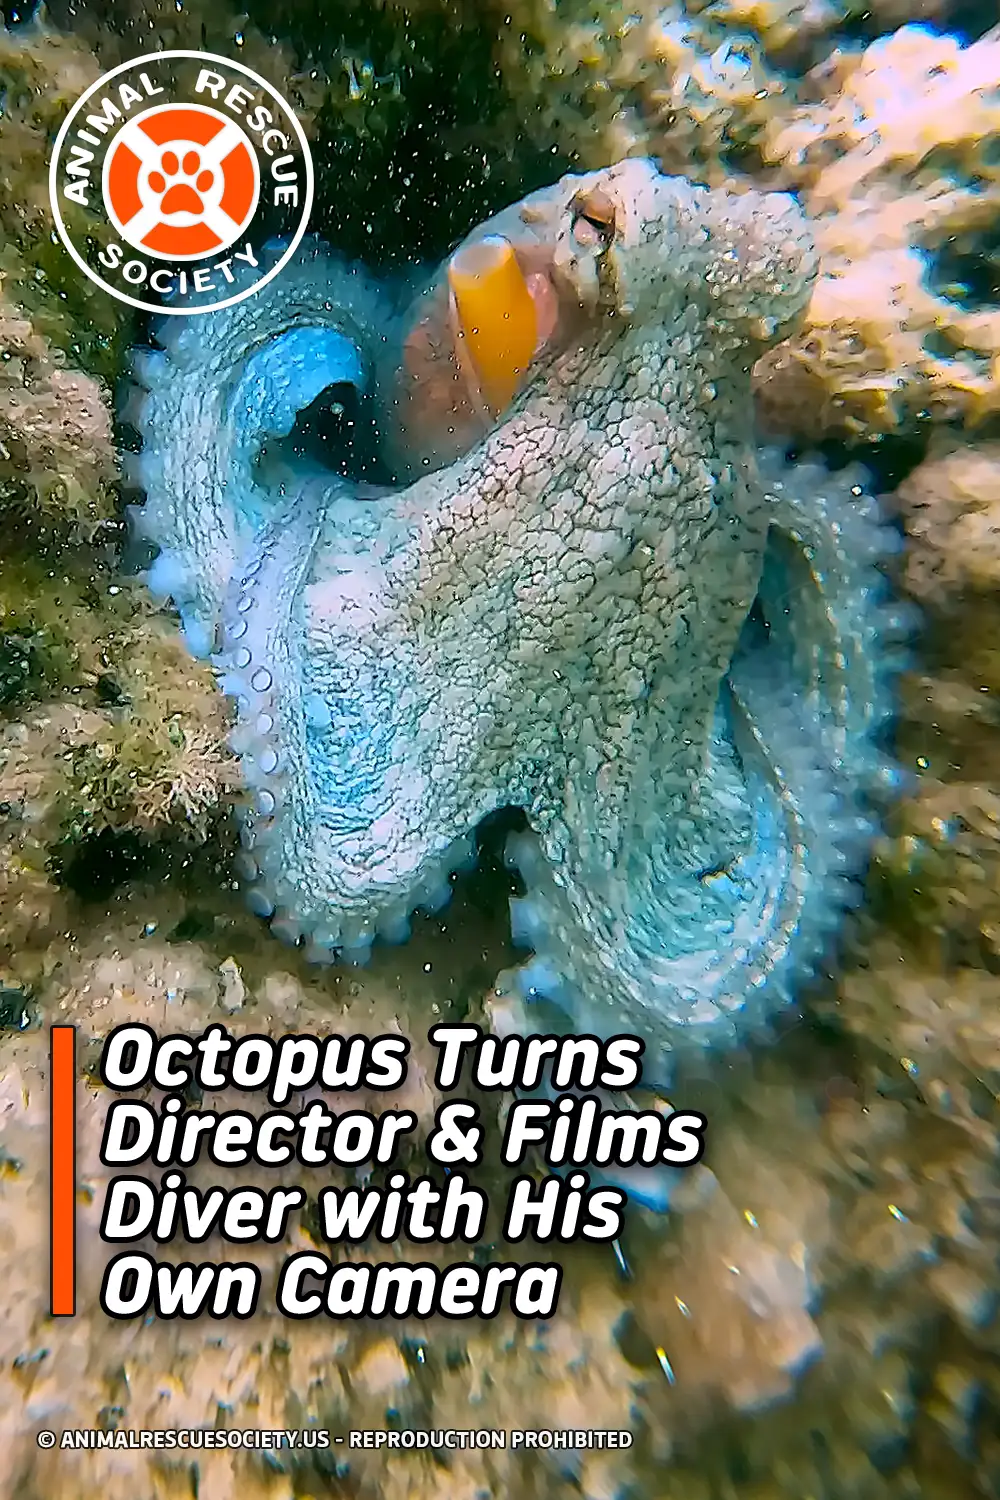 Octopus Turns Director & Films Diver with His Own Camera